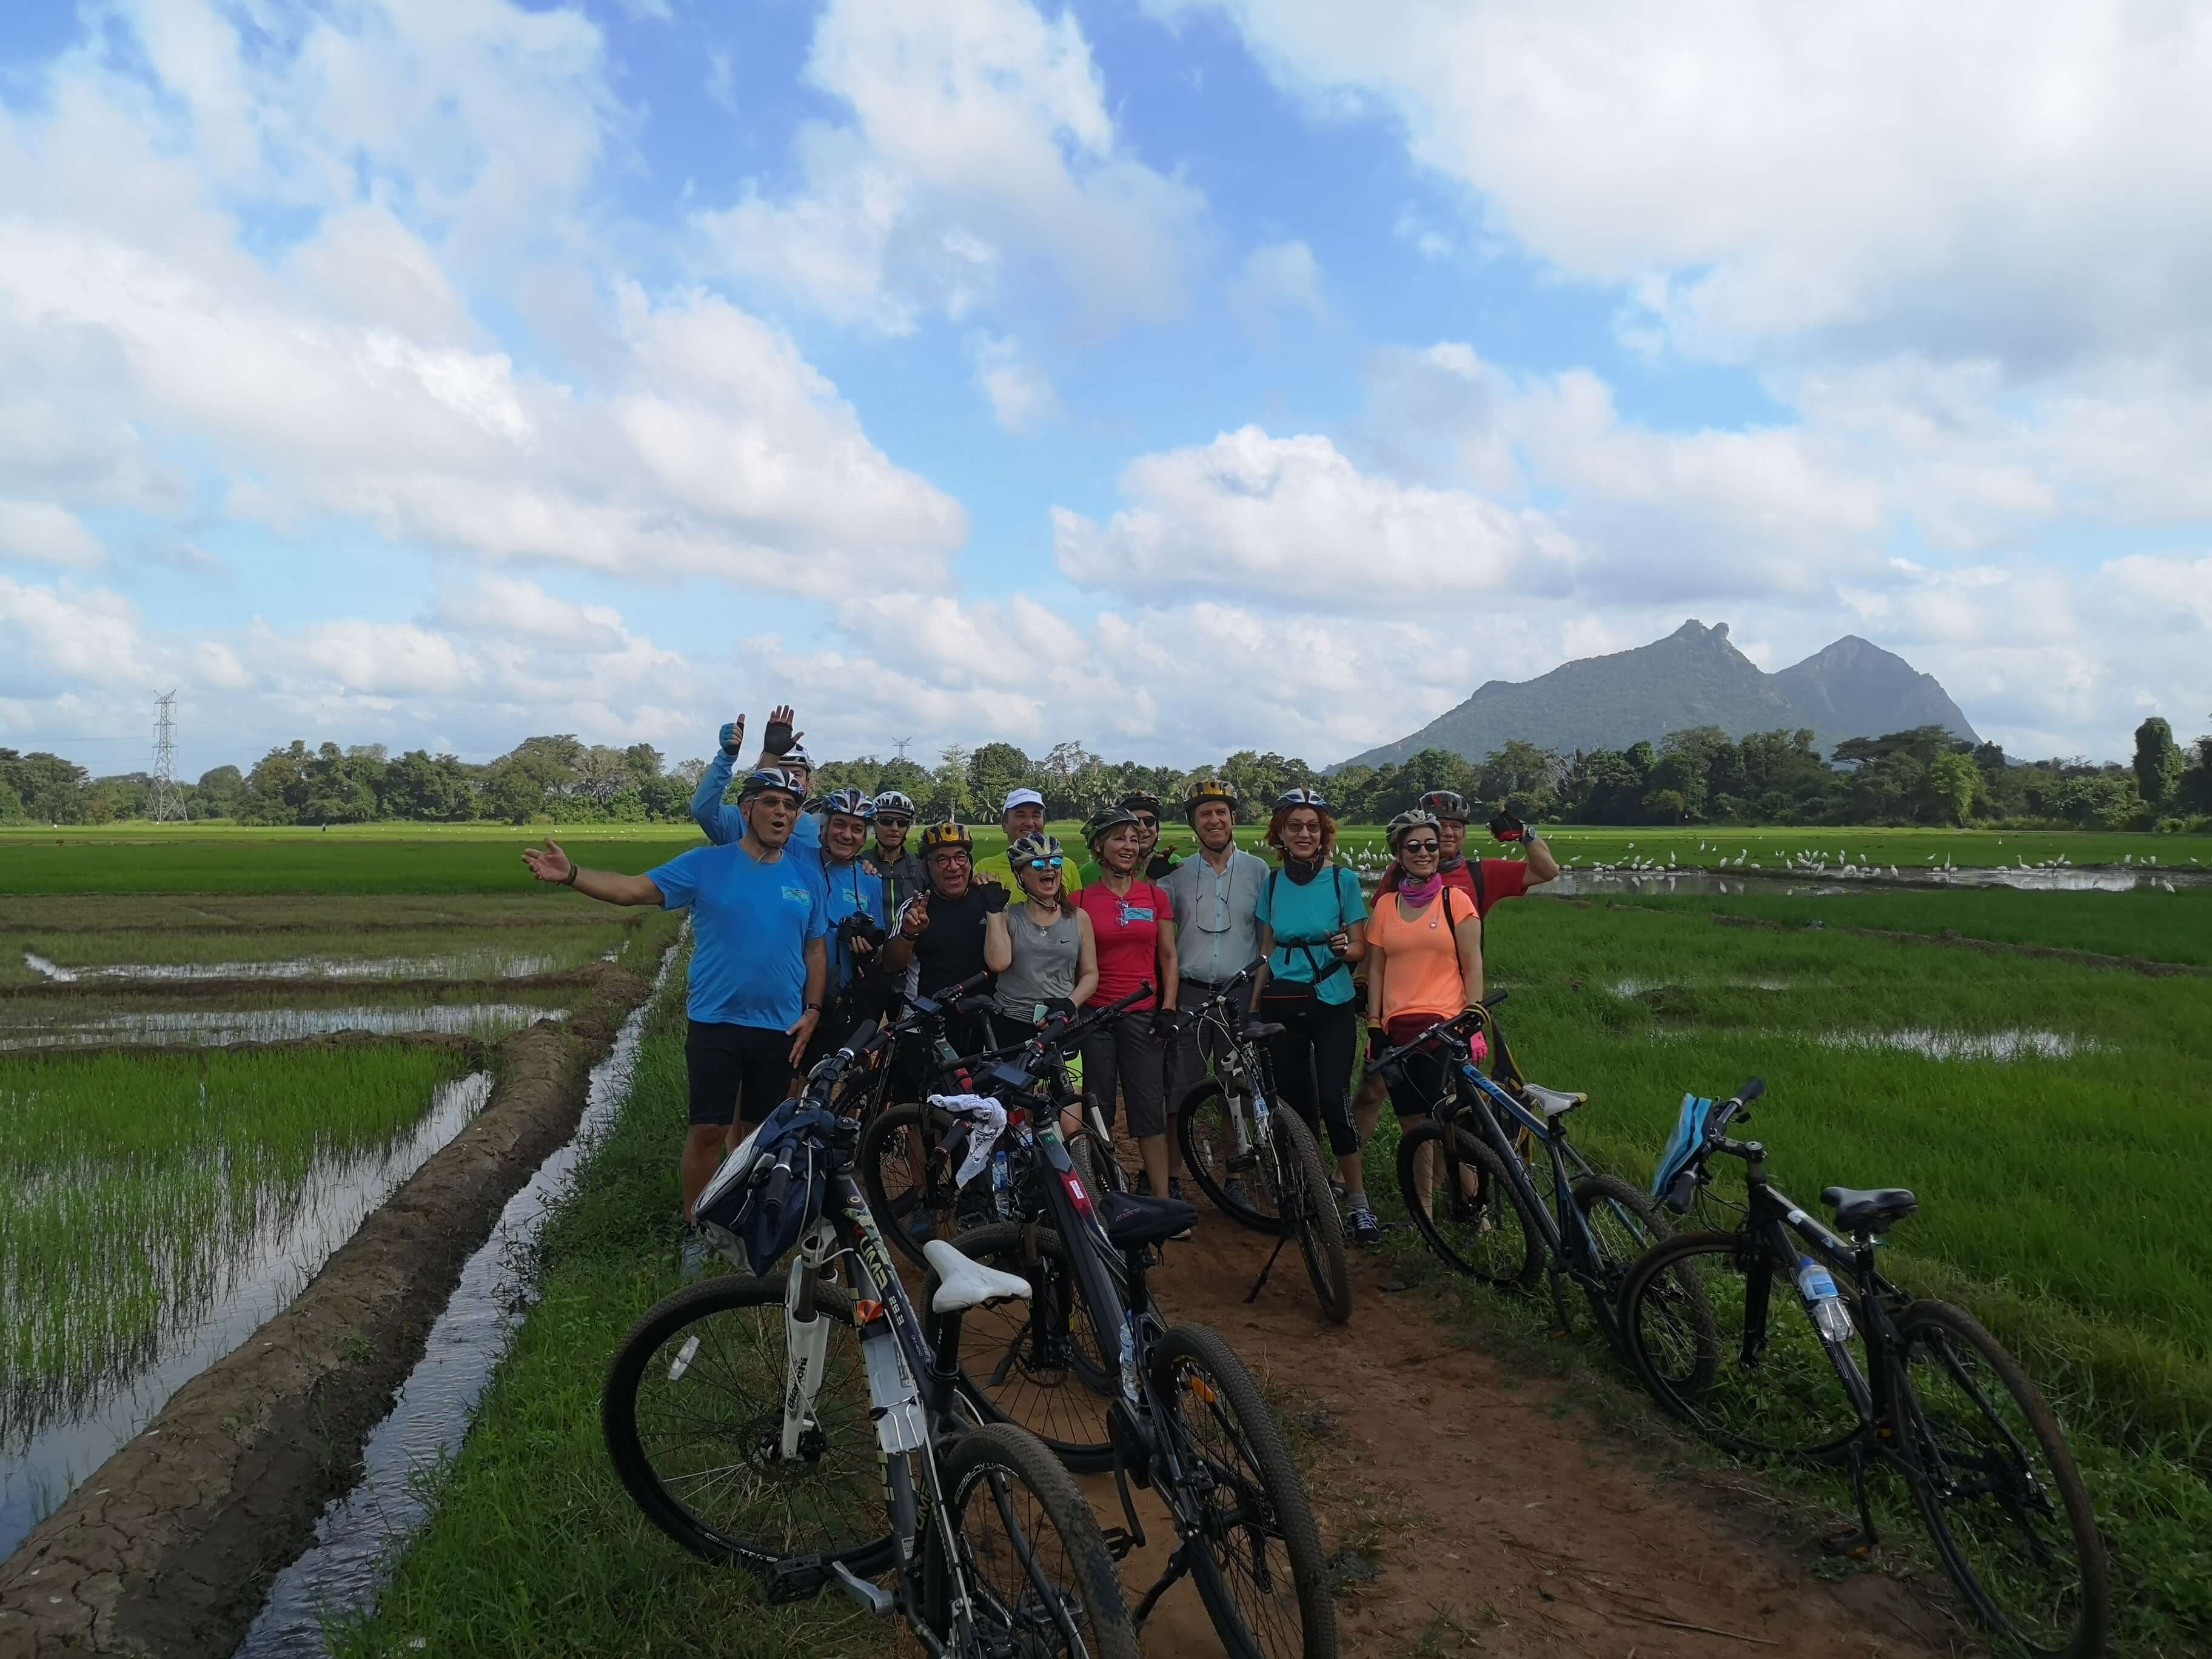 A photo of cyclists during the cycle tour in Mirissa - Weligama Sri Lanka